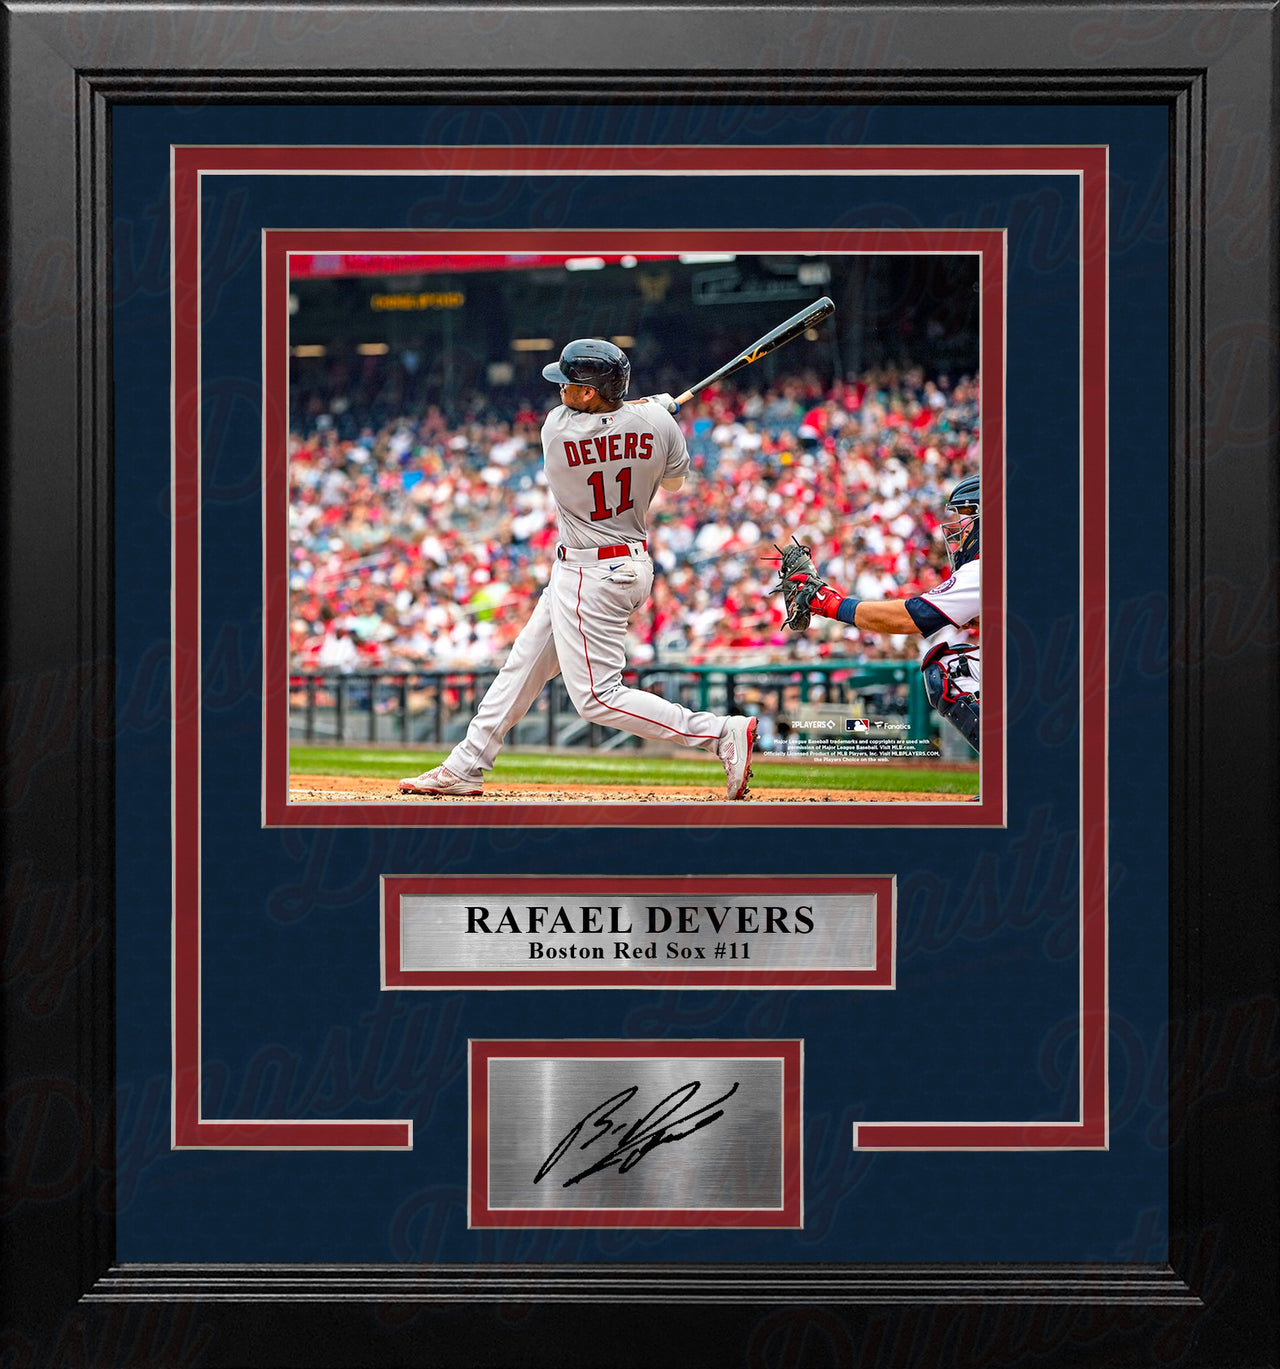 Rafael Devers in Action Boston Red Sox 8" x 10" Framed Baseball Photo with Engraved Autograph - Dynasty Sports & Framing 